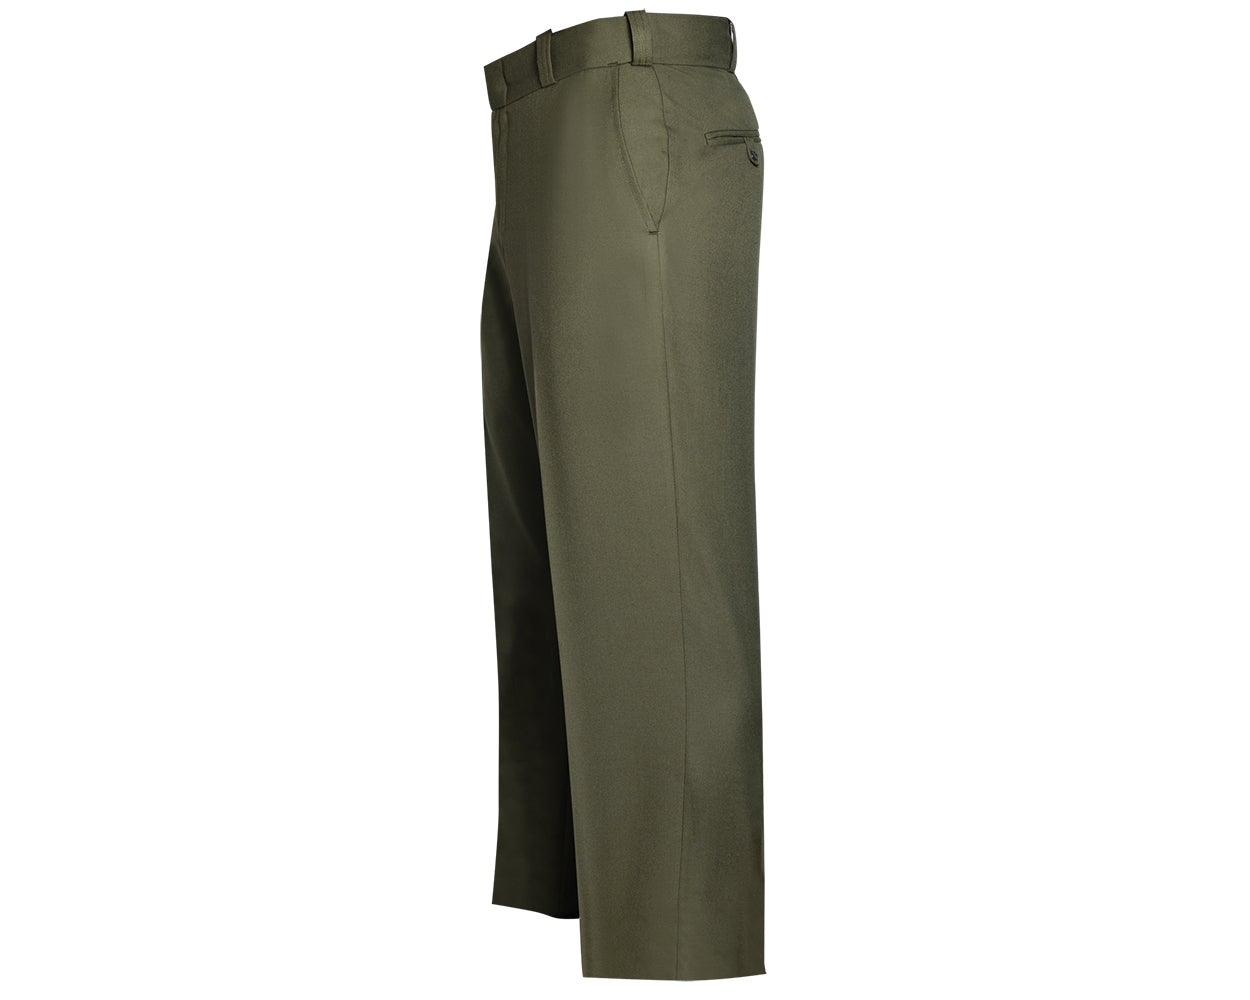 Flying Cross Deluxe Tactical 68% Poly/30% Rayon/2% Lycra® Men's Uniform Pants 39400 - Newest Products